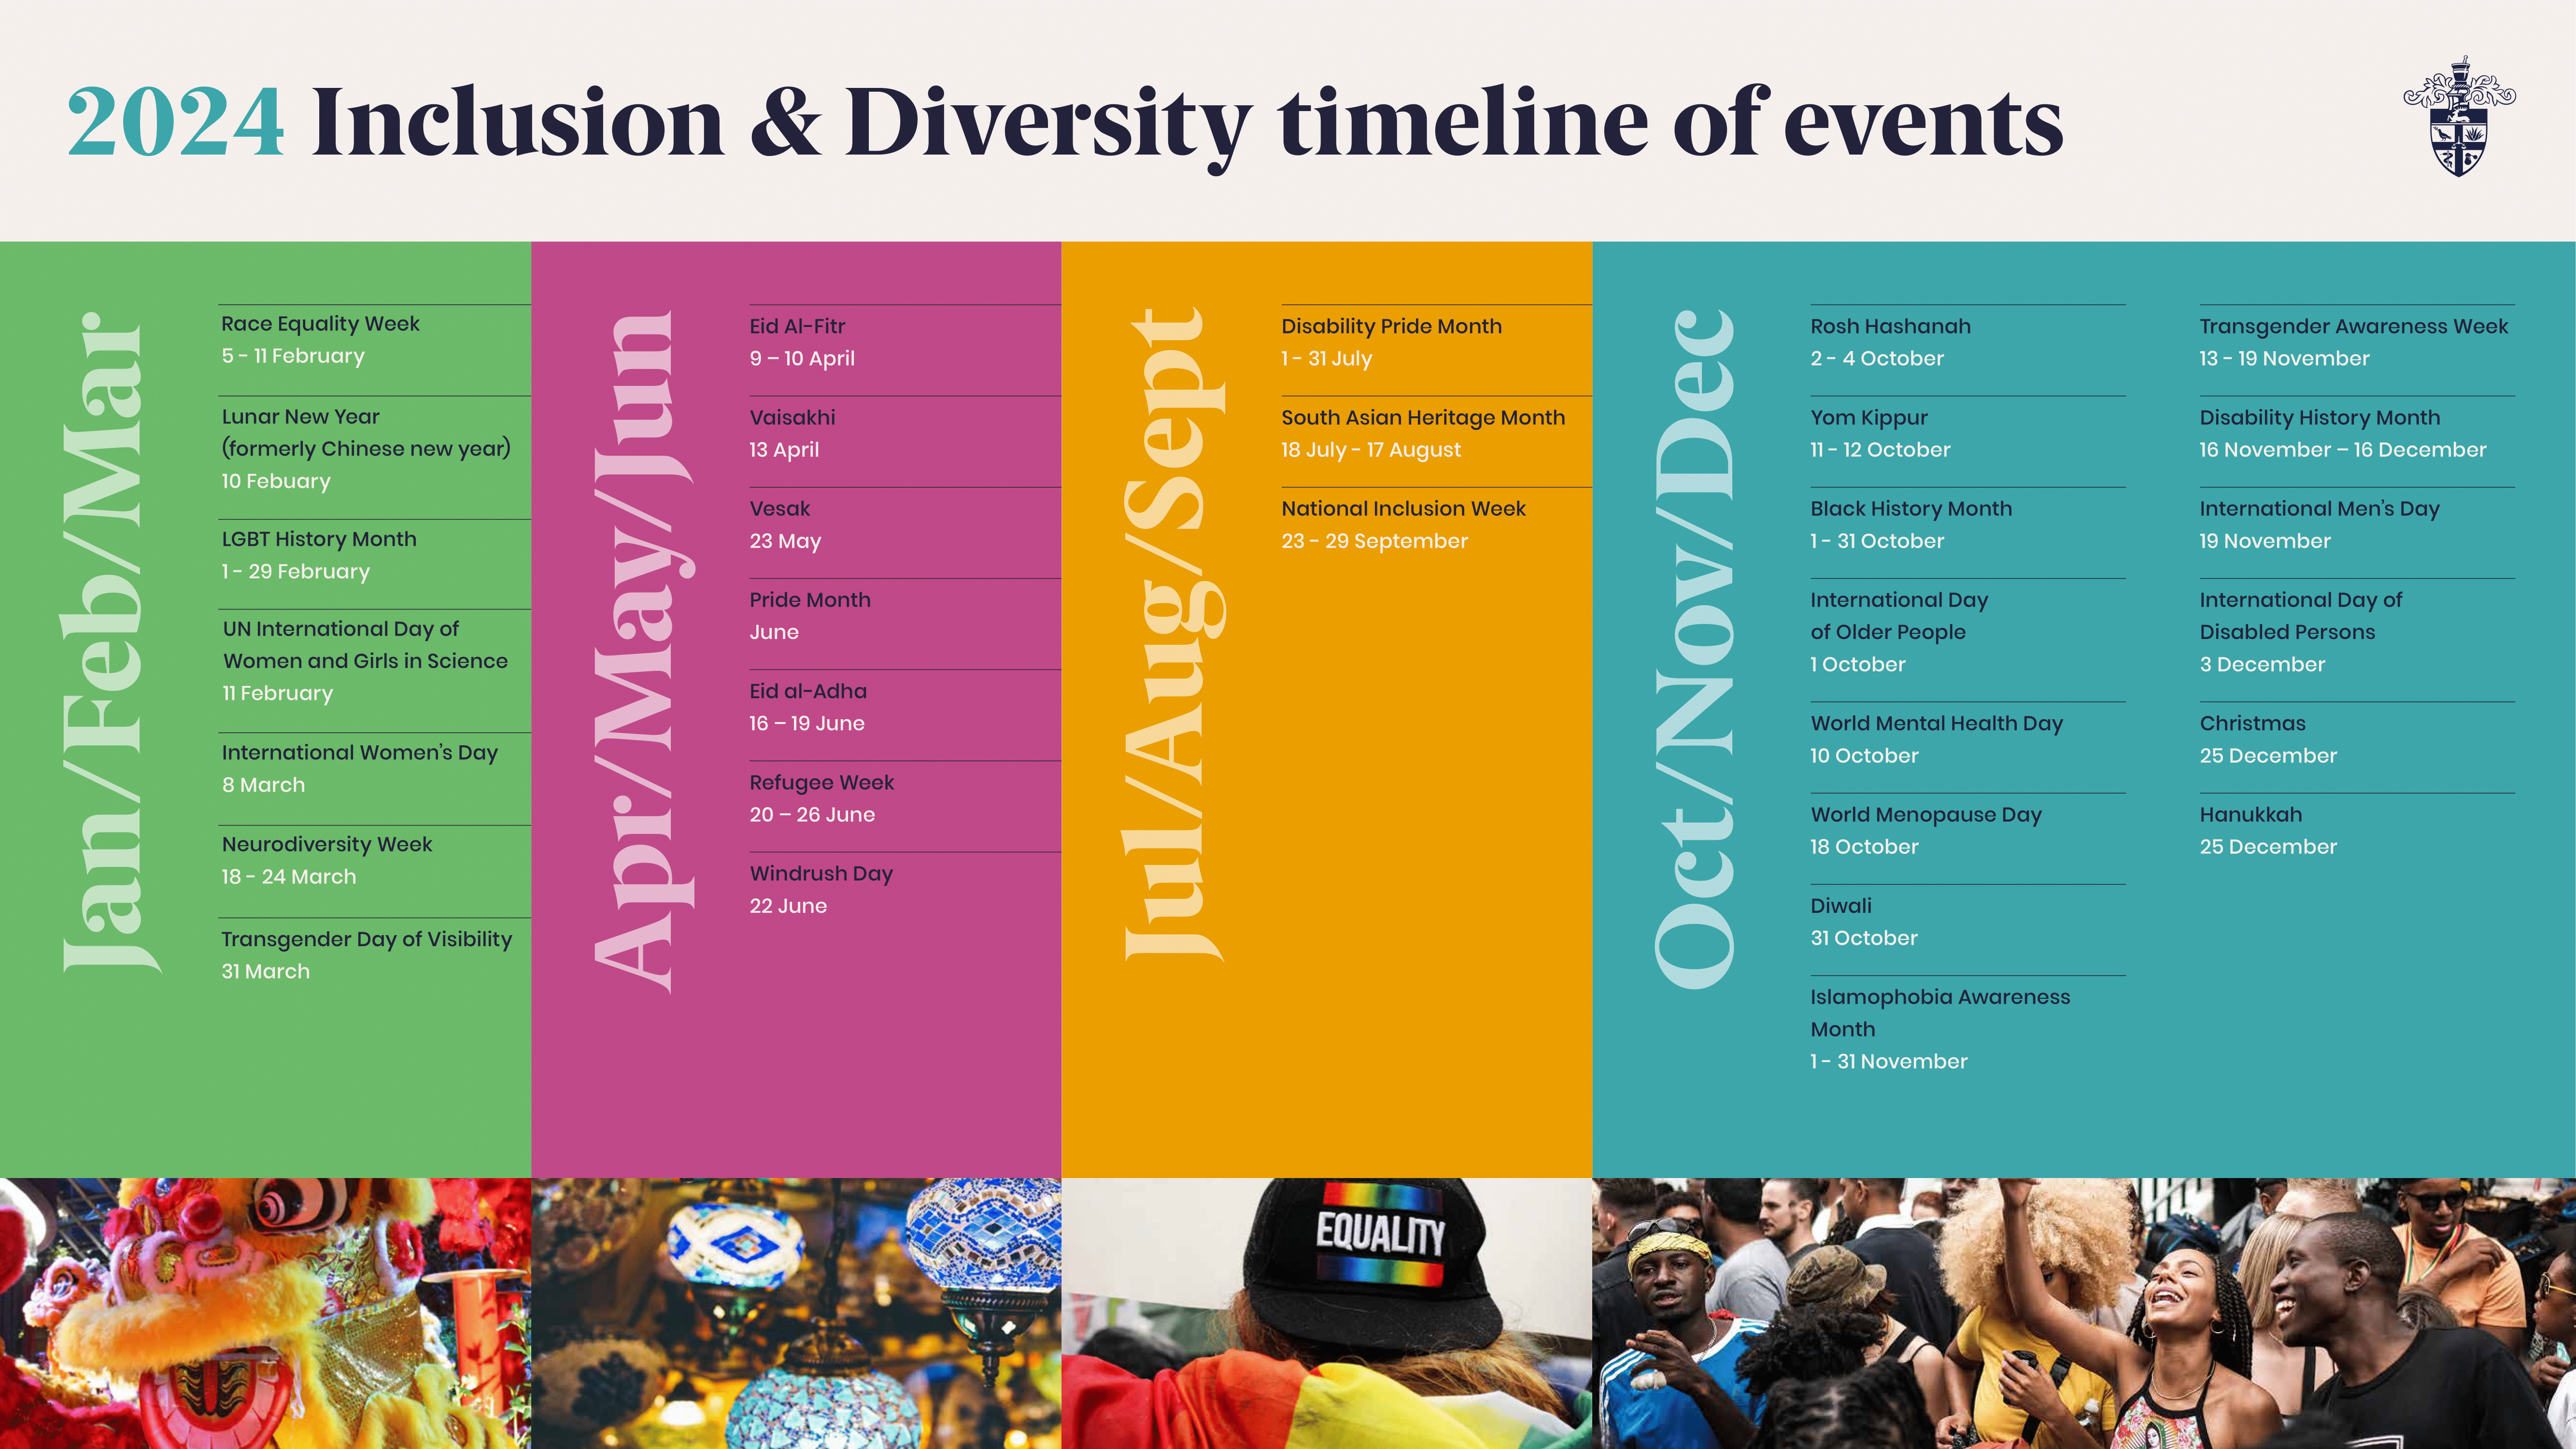 RPS Inclusion and Diversity timeline of events 2024